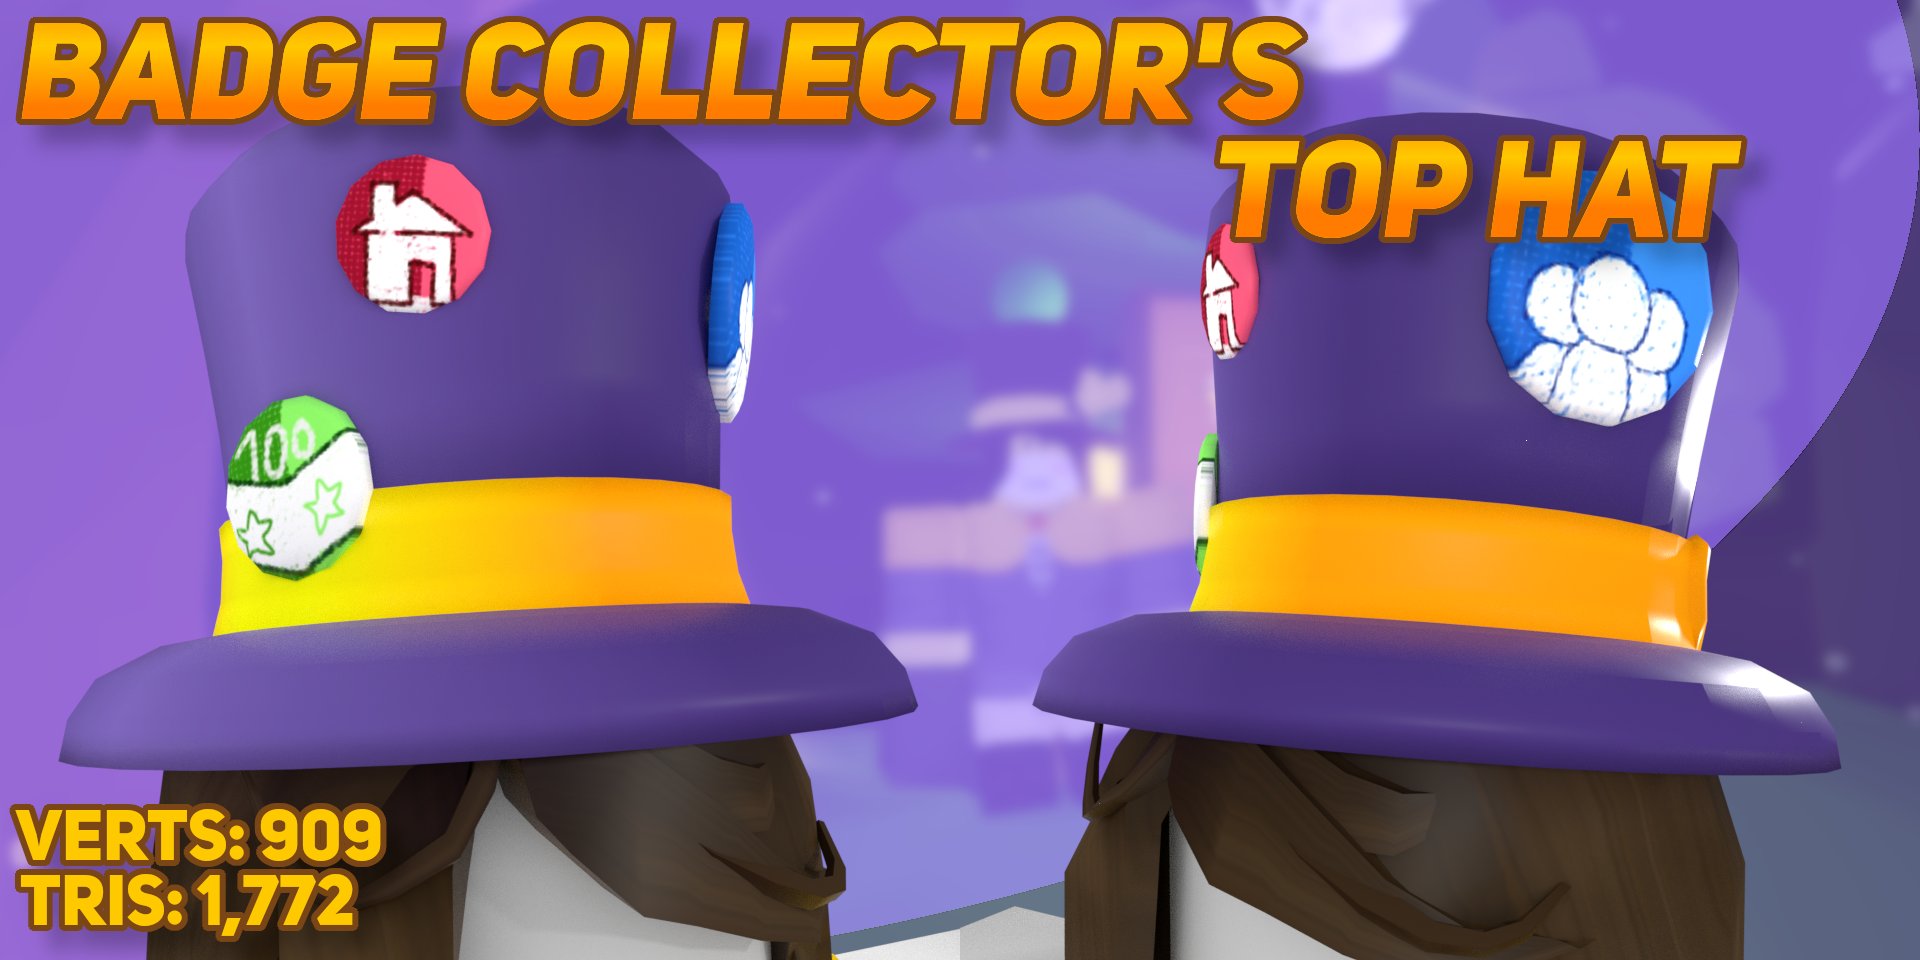 Belownatural On Twitter Gotta Collect Those Badges Presenting The Badge Collector S Top Hat Now You Can Fully Cosplay As Your Favorite Kid With A Hat Once I Get Ugc Access - roblox id 772 love